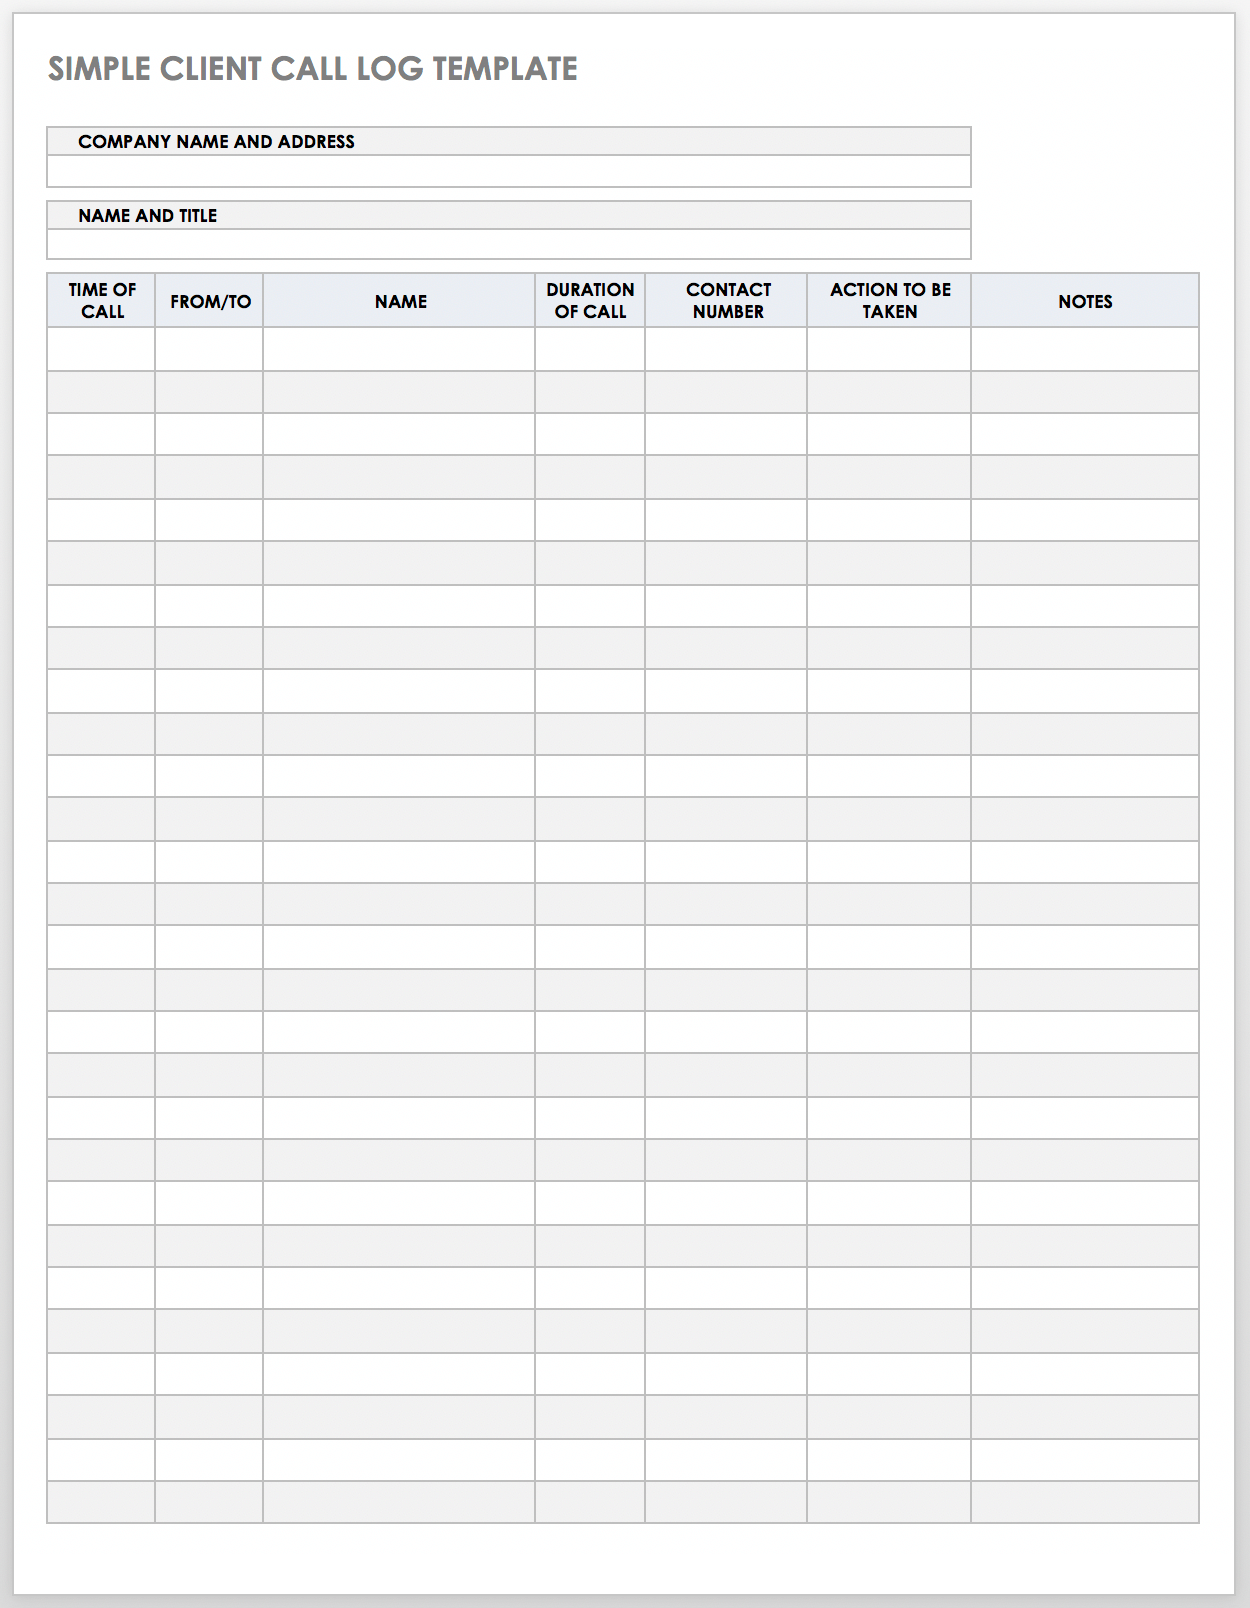 Simple Client Call Log Template